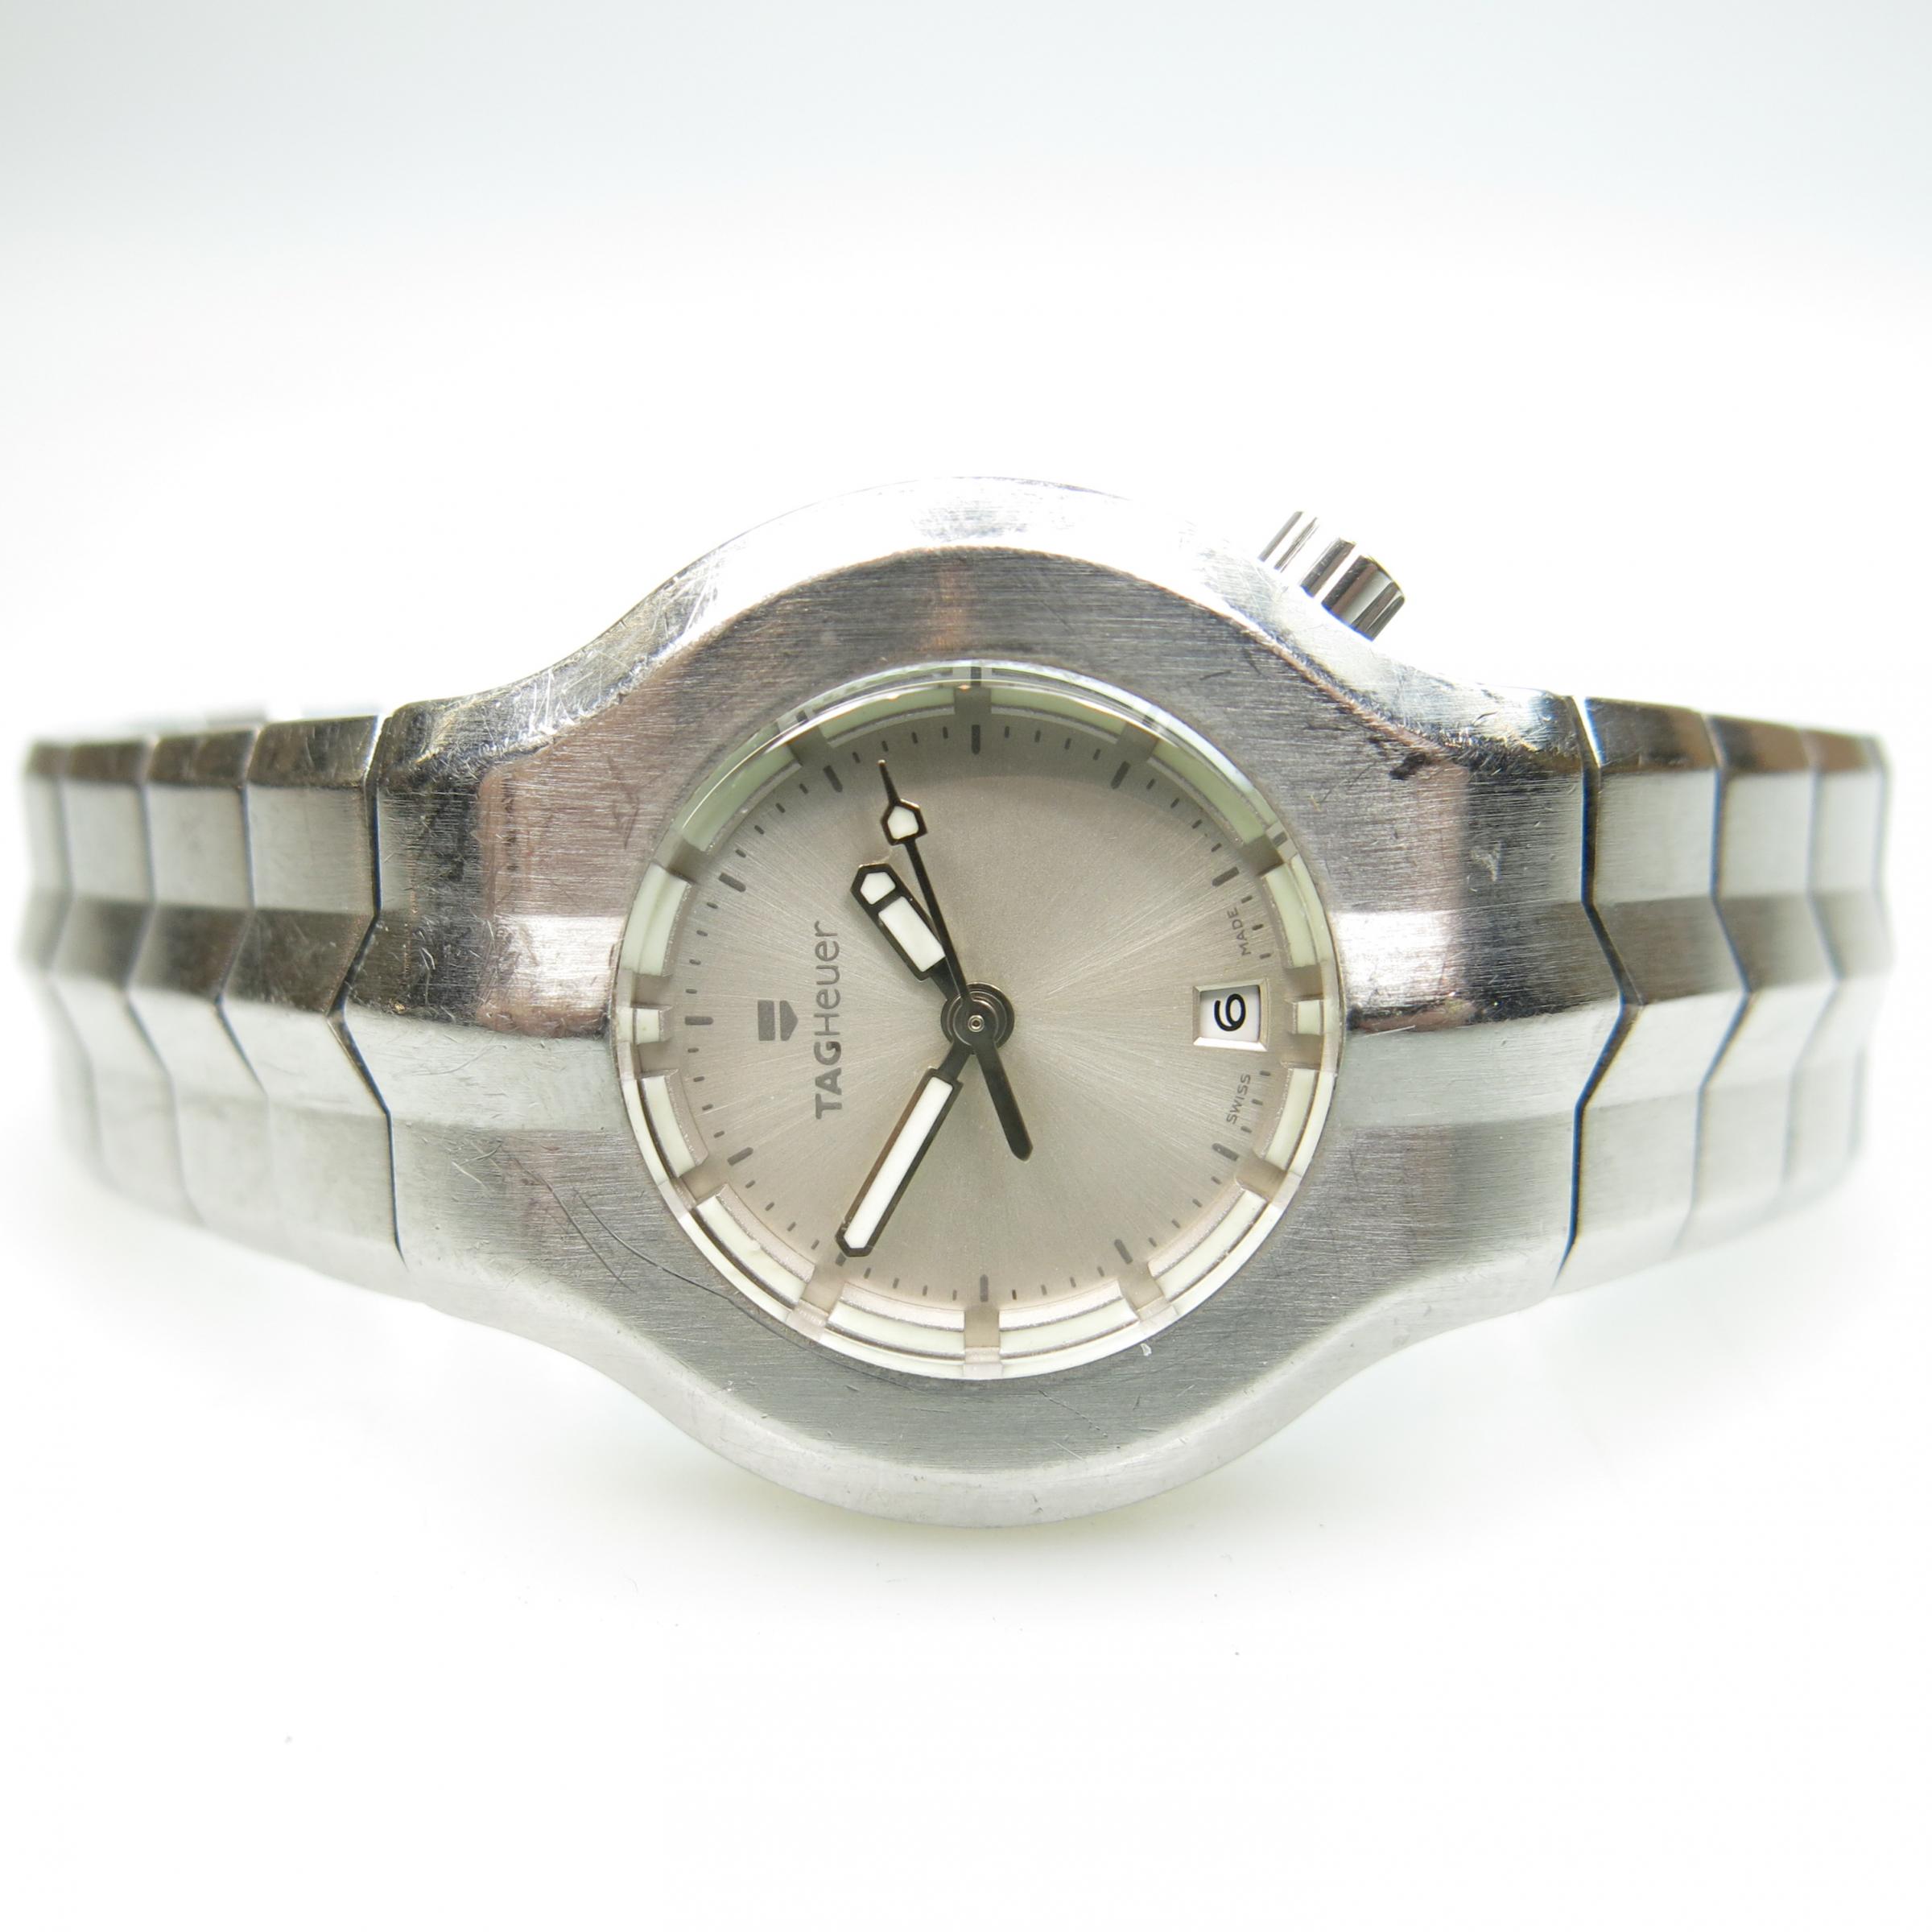 Lady's Tag/Heuer 'Alter Ego' Wristwatch, With Date